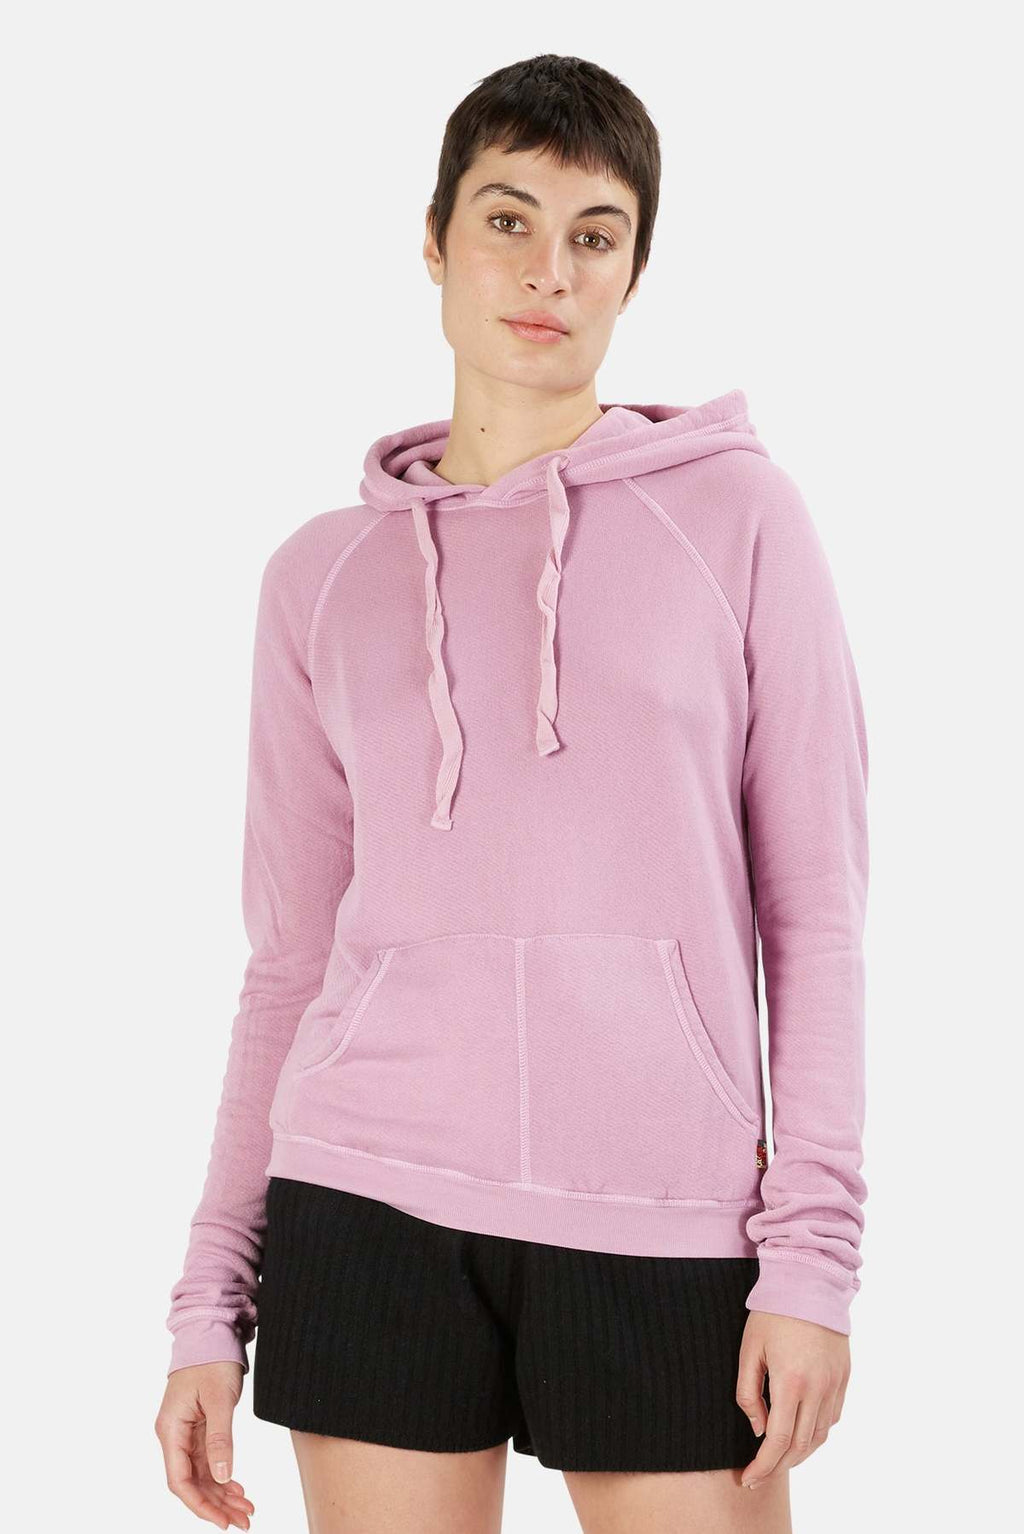 FREECITY Superfluff Lux Pullover Hoodie in Petal